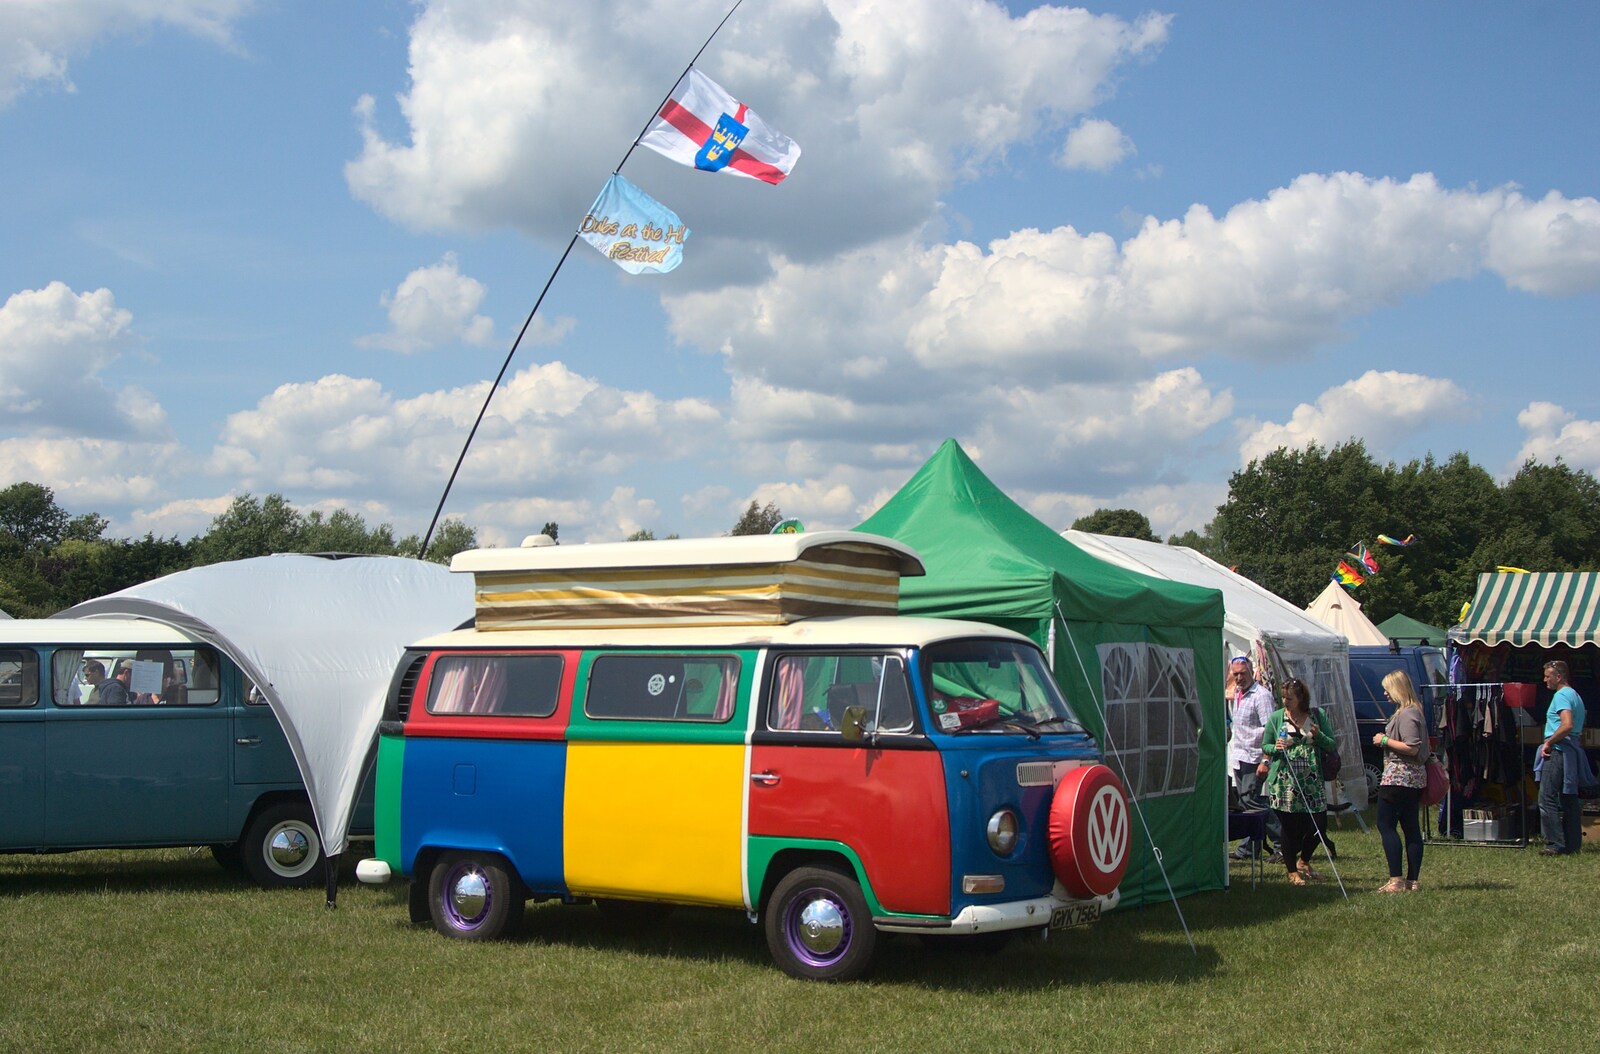 A multi-coloured VW van from TouchType at Cubana, BSCC at Gislingham, and Tas Pide, London and Suffolk - 12th June 2011